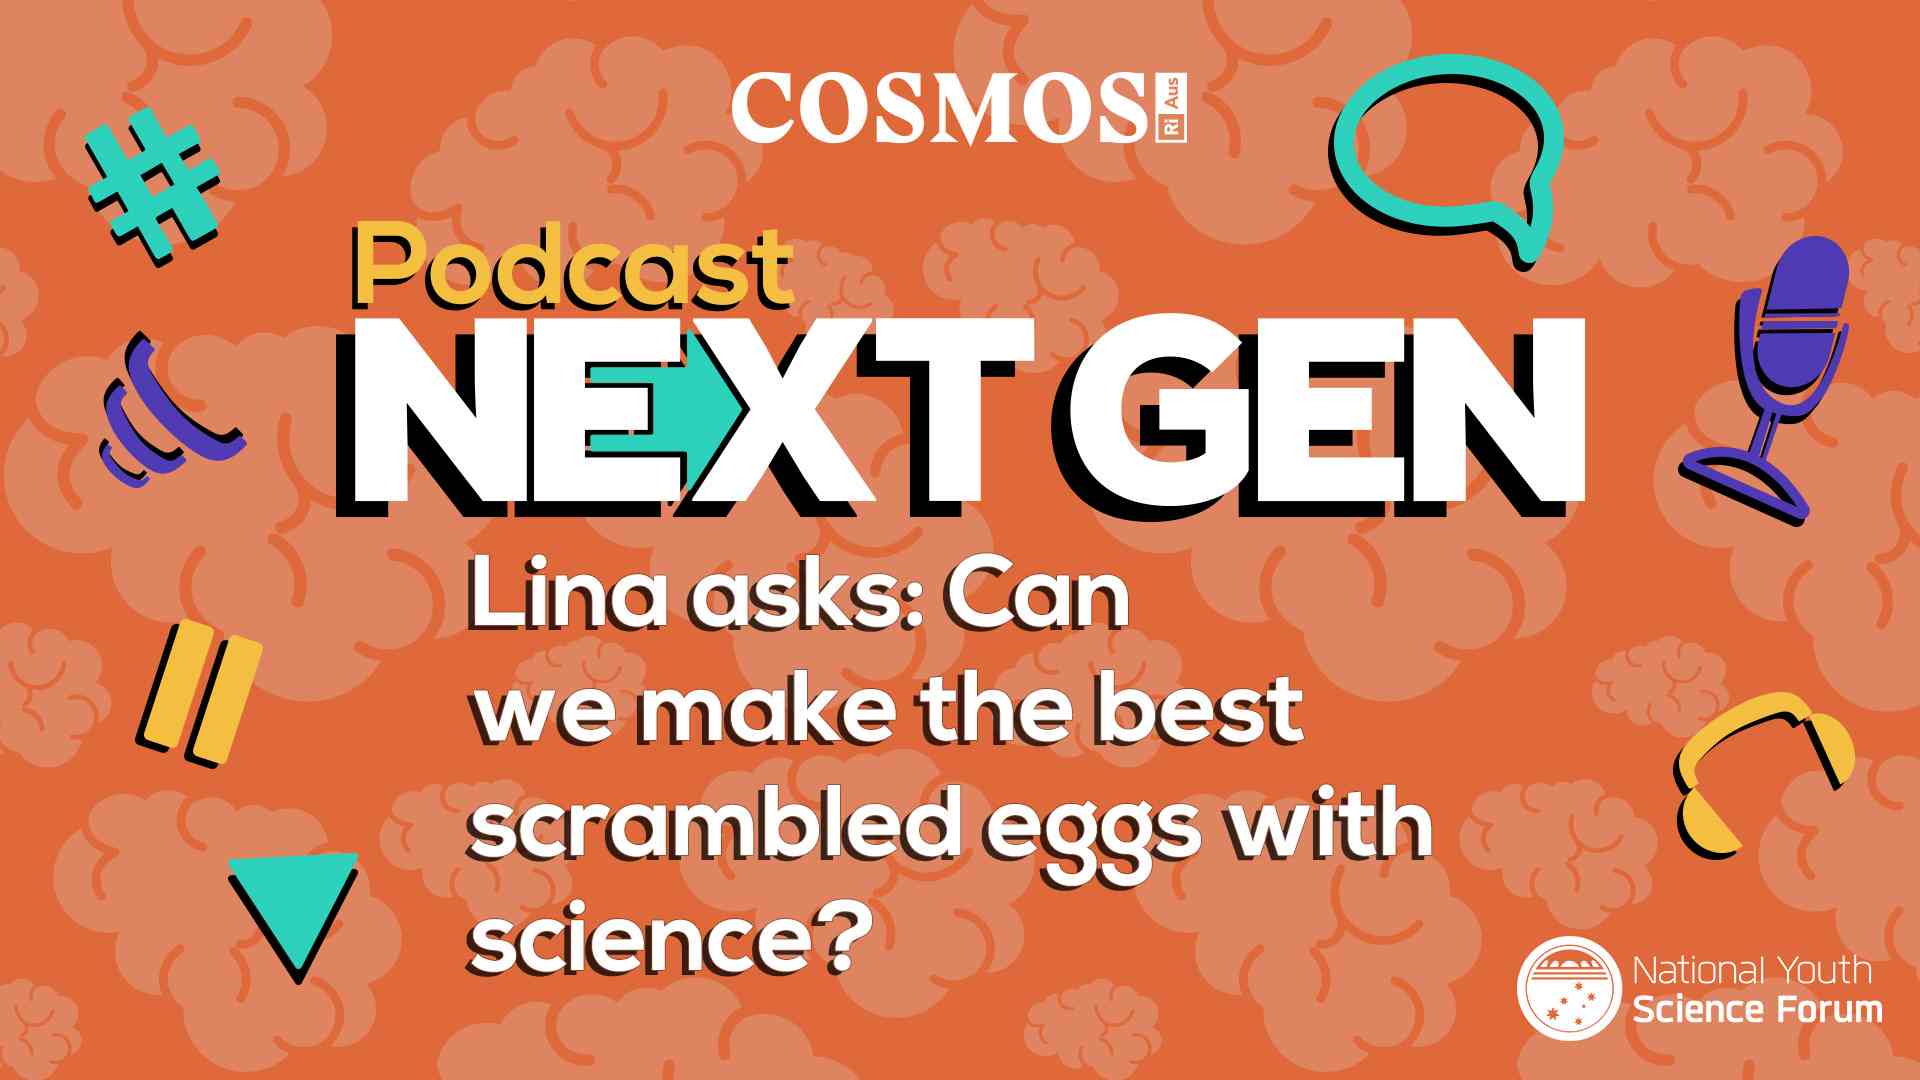 PODCAST NEXT GEN: Can we make the best scrambled eggs with science?